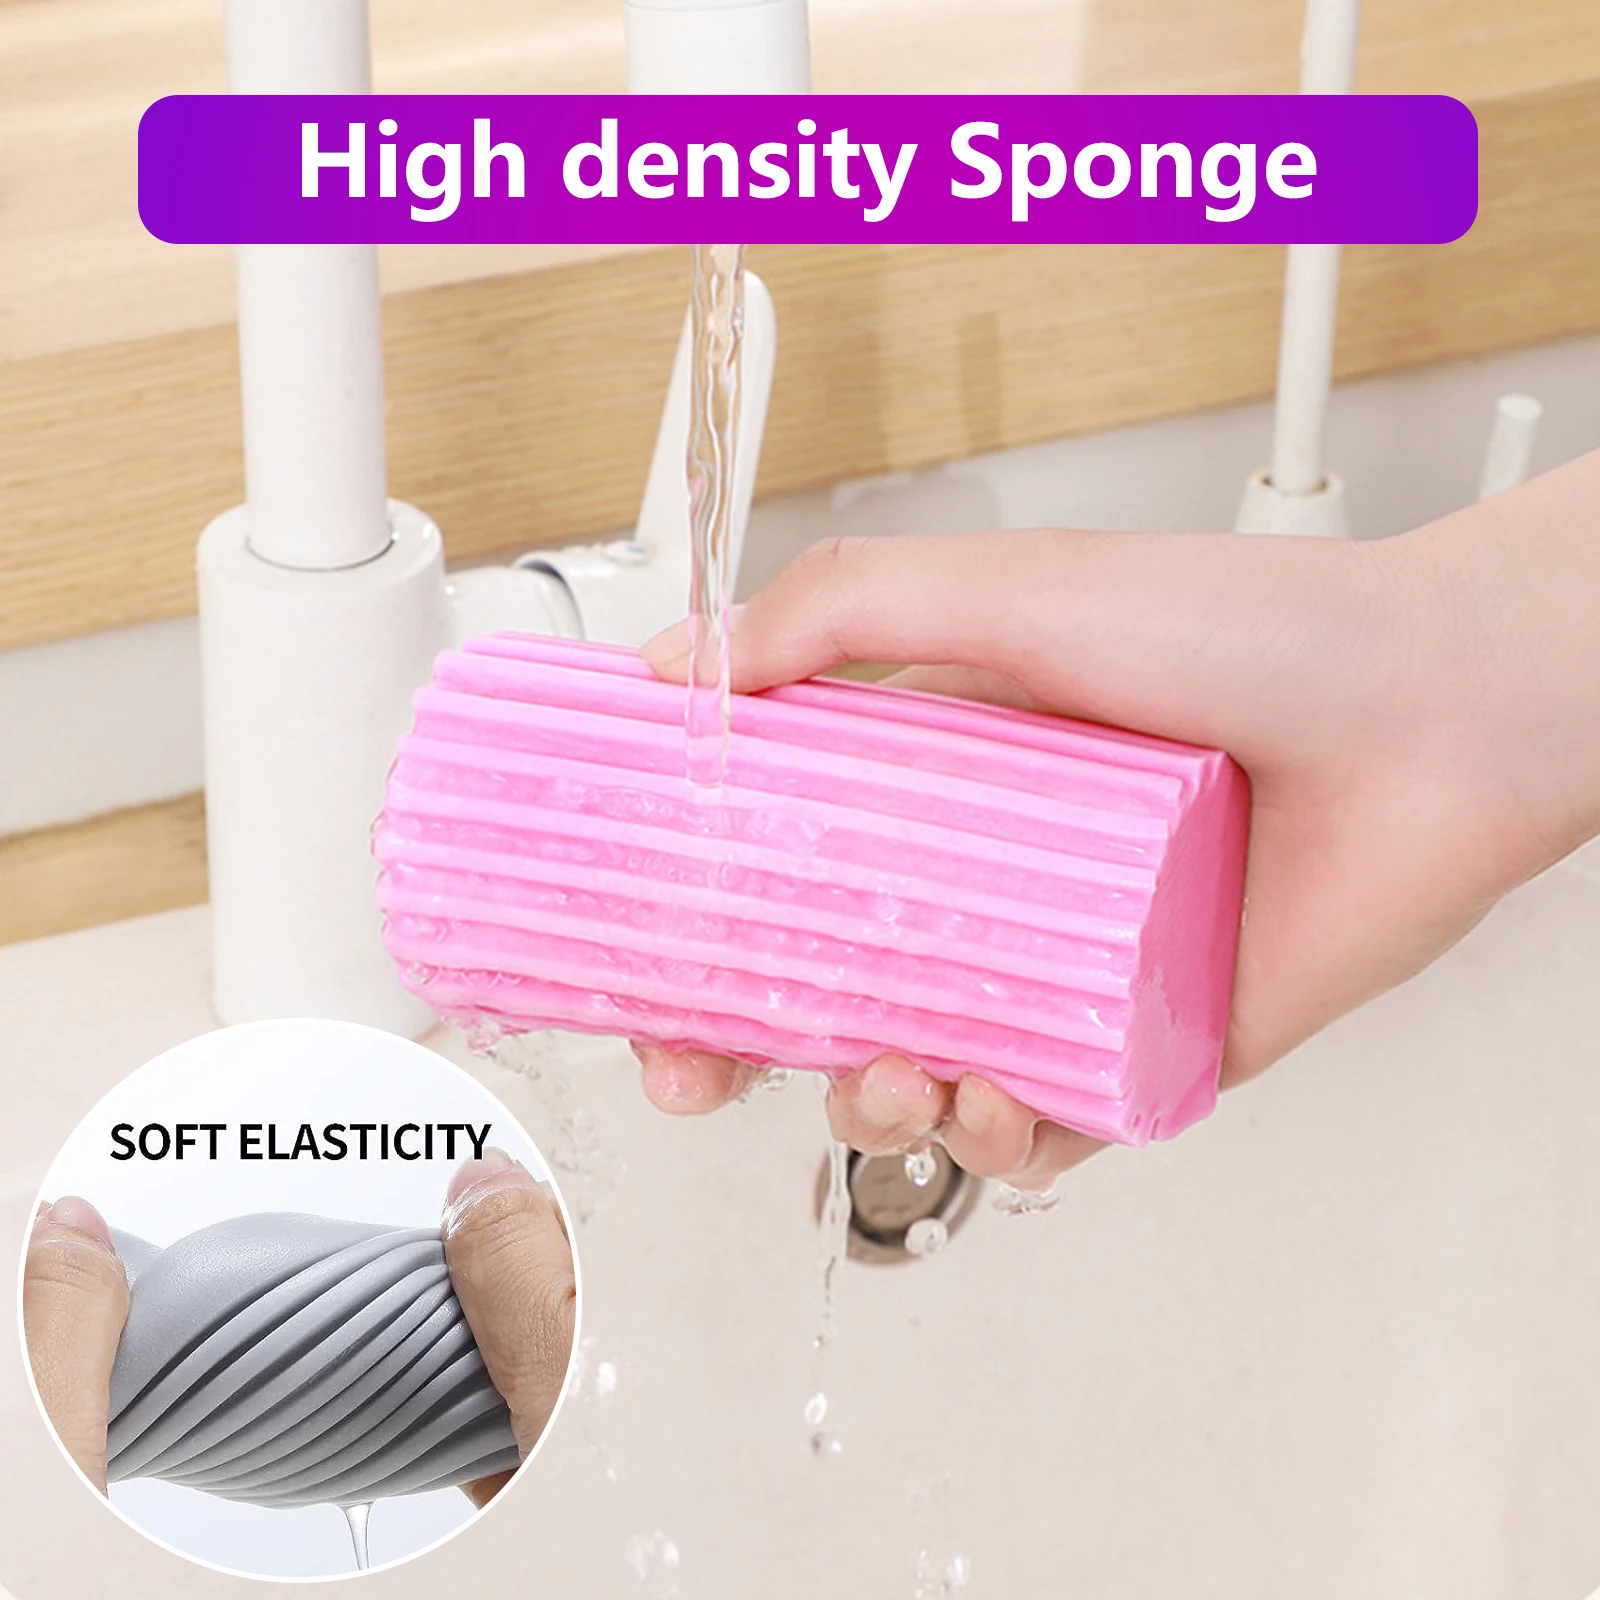 https://ae01.alicdn.com/kf/S3995994f4ee14812845d67e7cb01addaZ/Damp-Duster-Clean-Sponge-PVA-Portable-Cleaning-Brush-Duster-For-Cleaning-Blinds-Glass-Baseboards-Vents-Railings.jpg